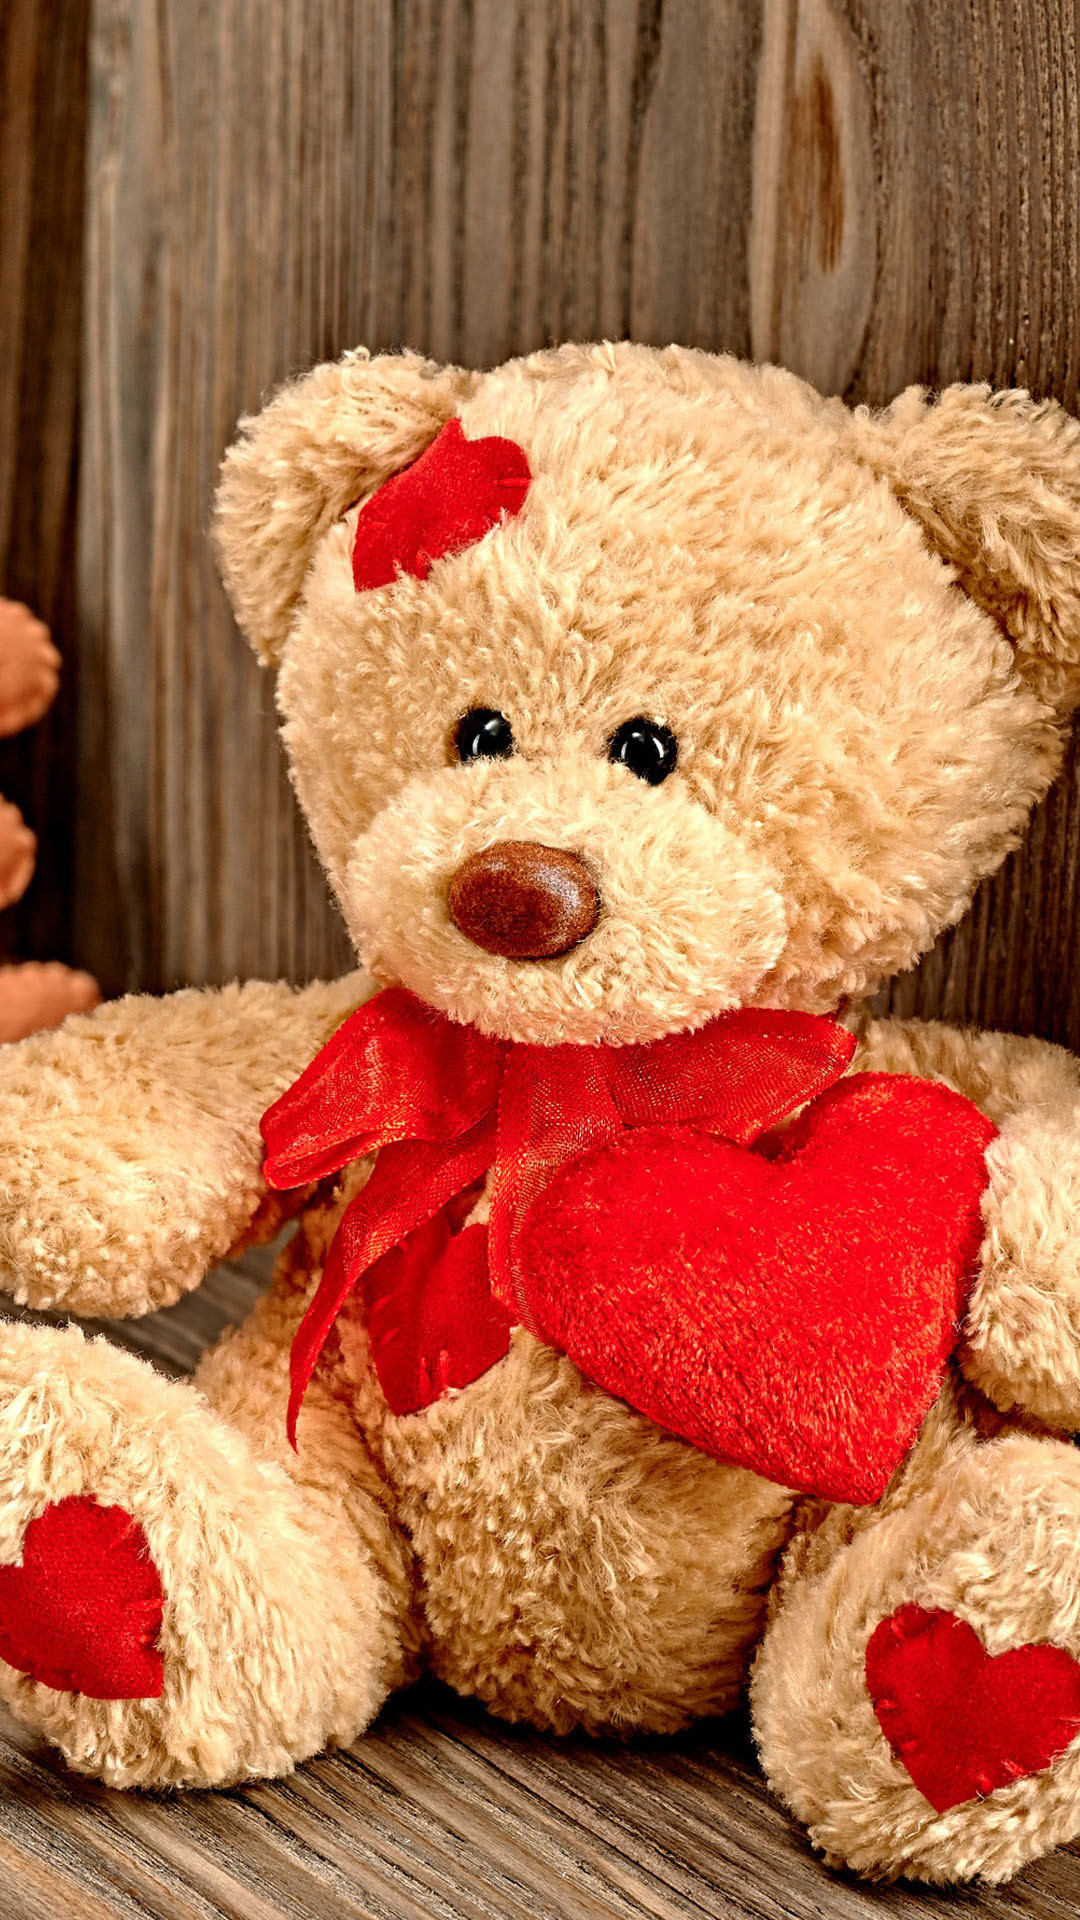 1080x1920 Teddy Bear Love iPhone 6 and 6 Plus HD Wallpapers | Daily iPhone 6